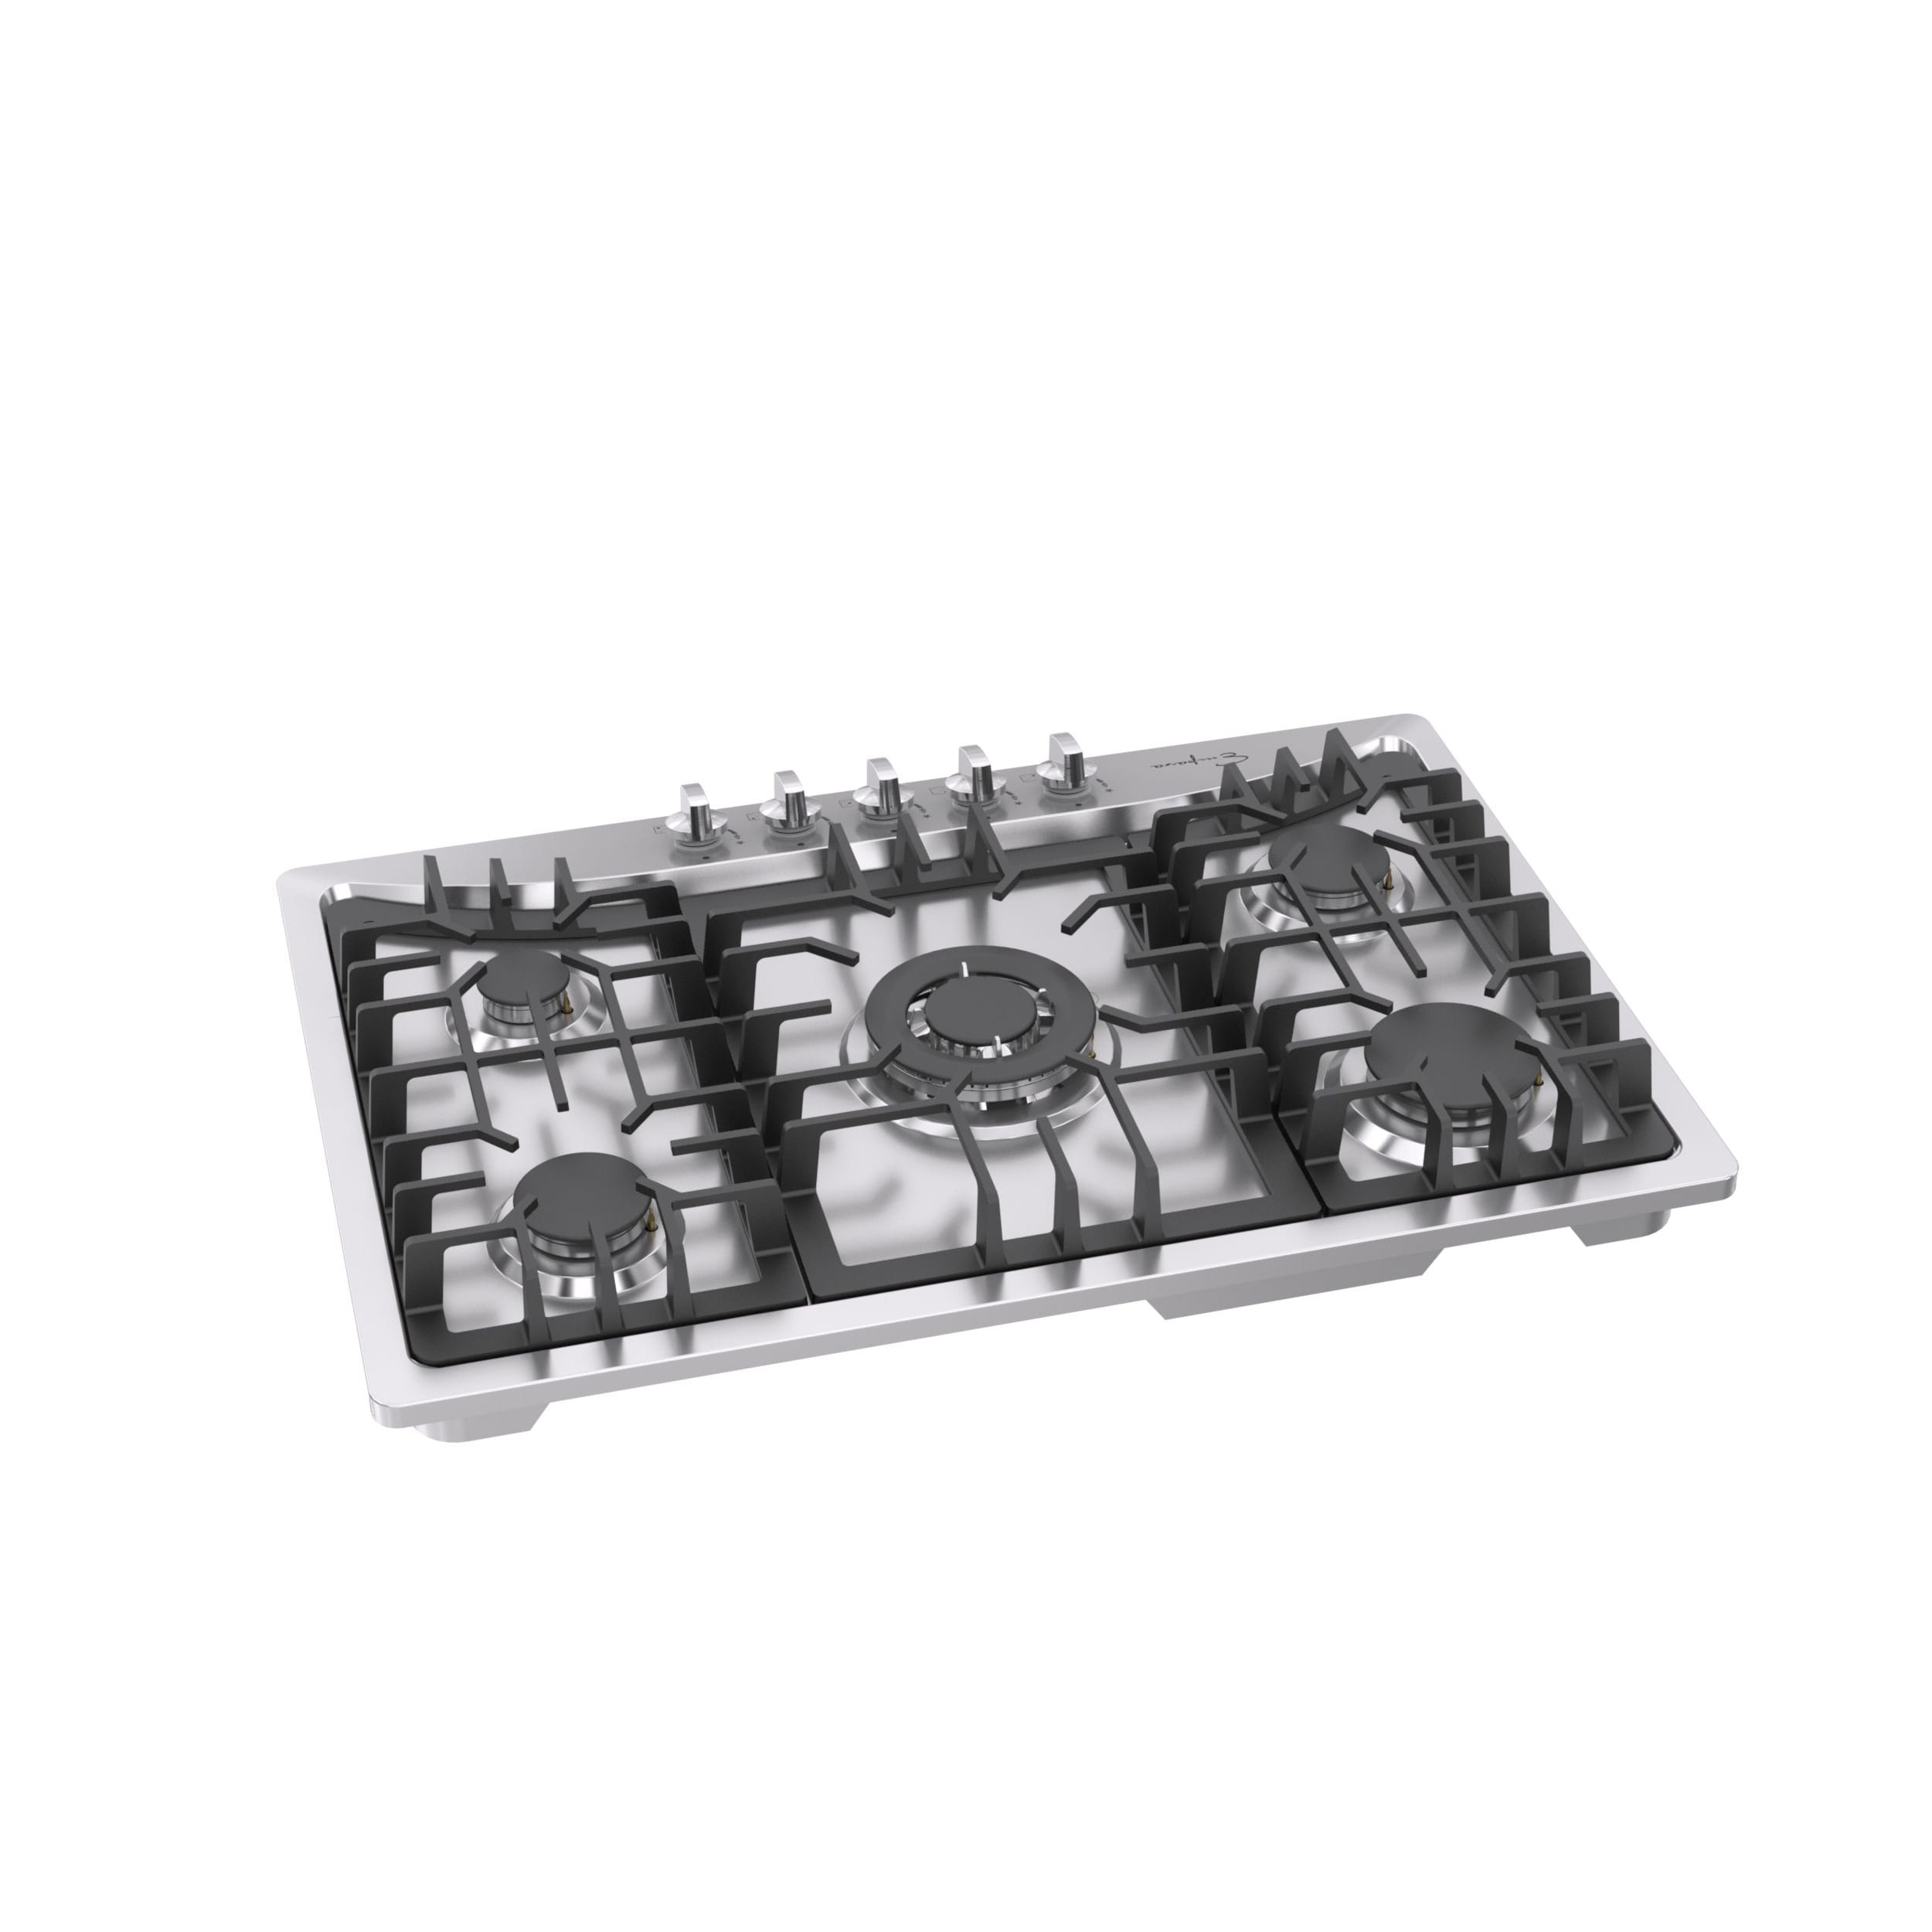 Empava 30 Stainless Steel 5 Italy Sabaf Burners Stove Top Gas Cooktop EMPV-30GC0A2 